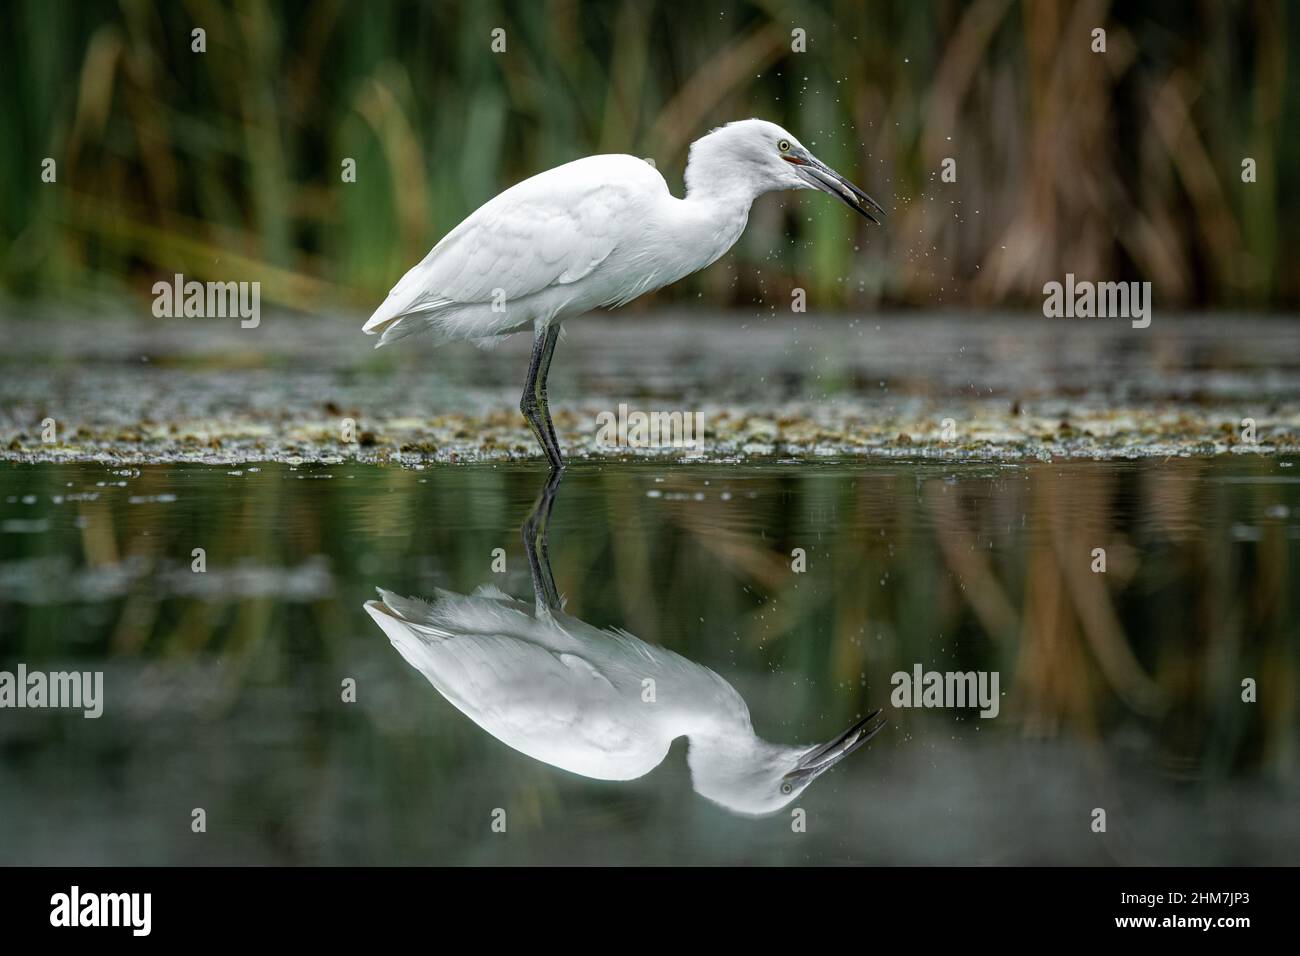 A egret, Egretta garzetta, fishing on a pool. It has caught a fish and shaking its head, It is reflected in the water Stock Photo